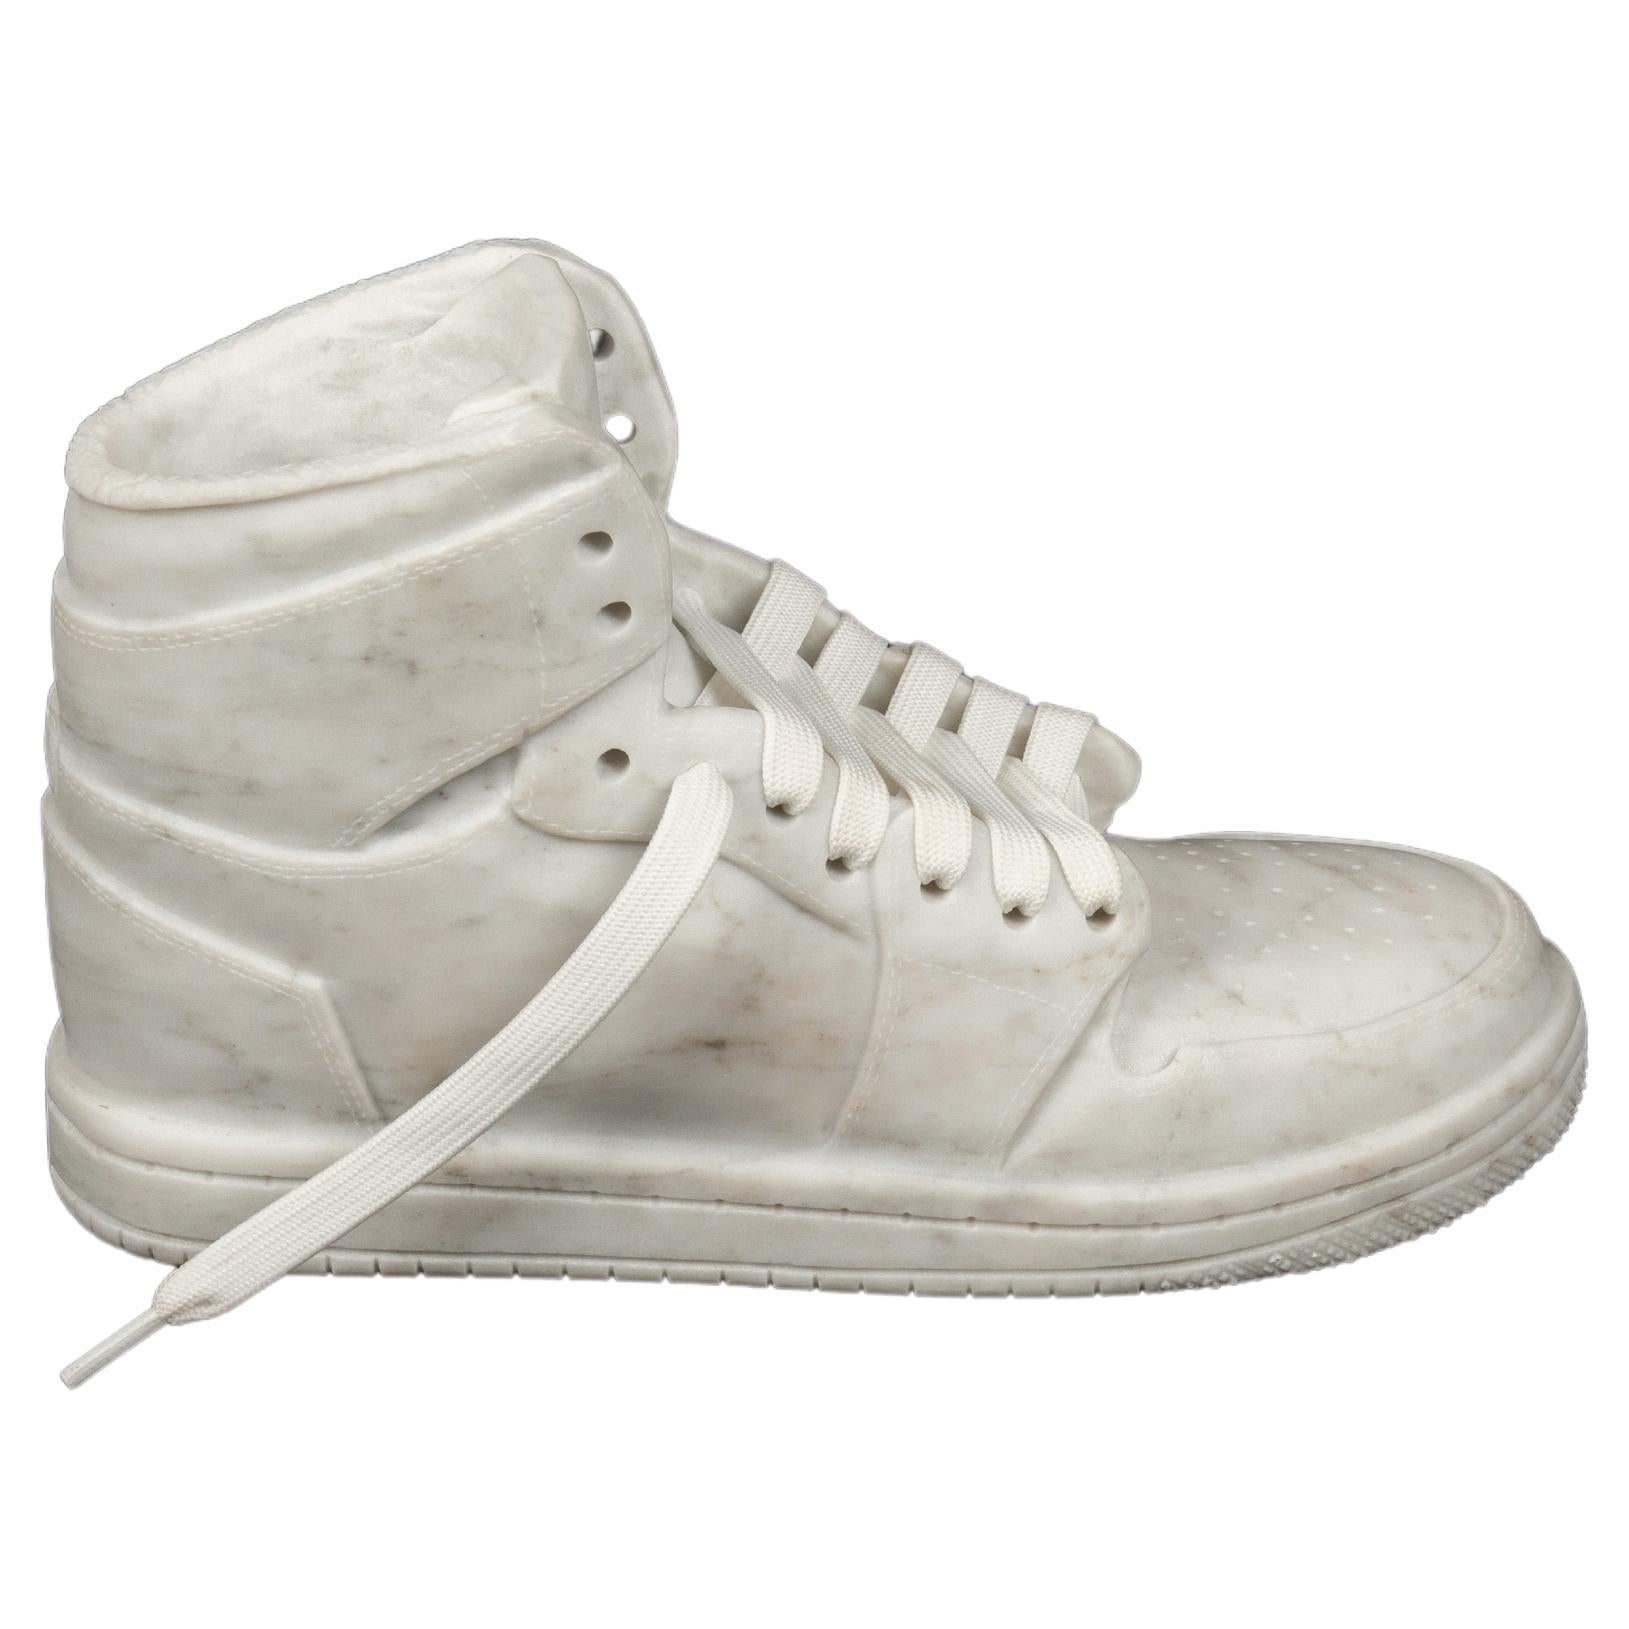 Carved White Marble Hightop Sneaker sculpture